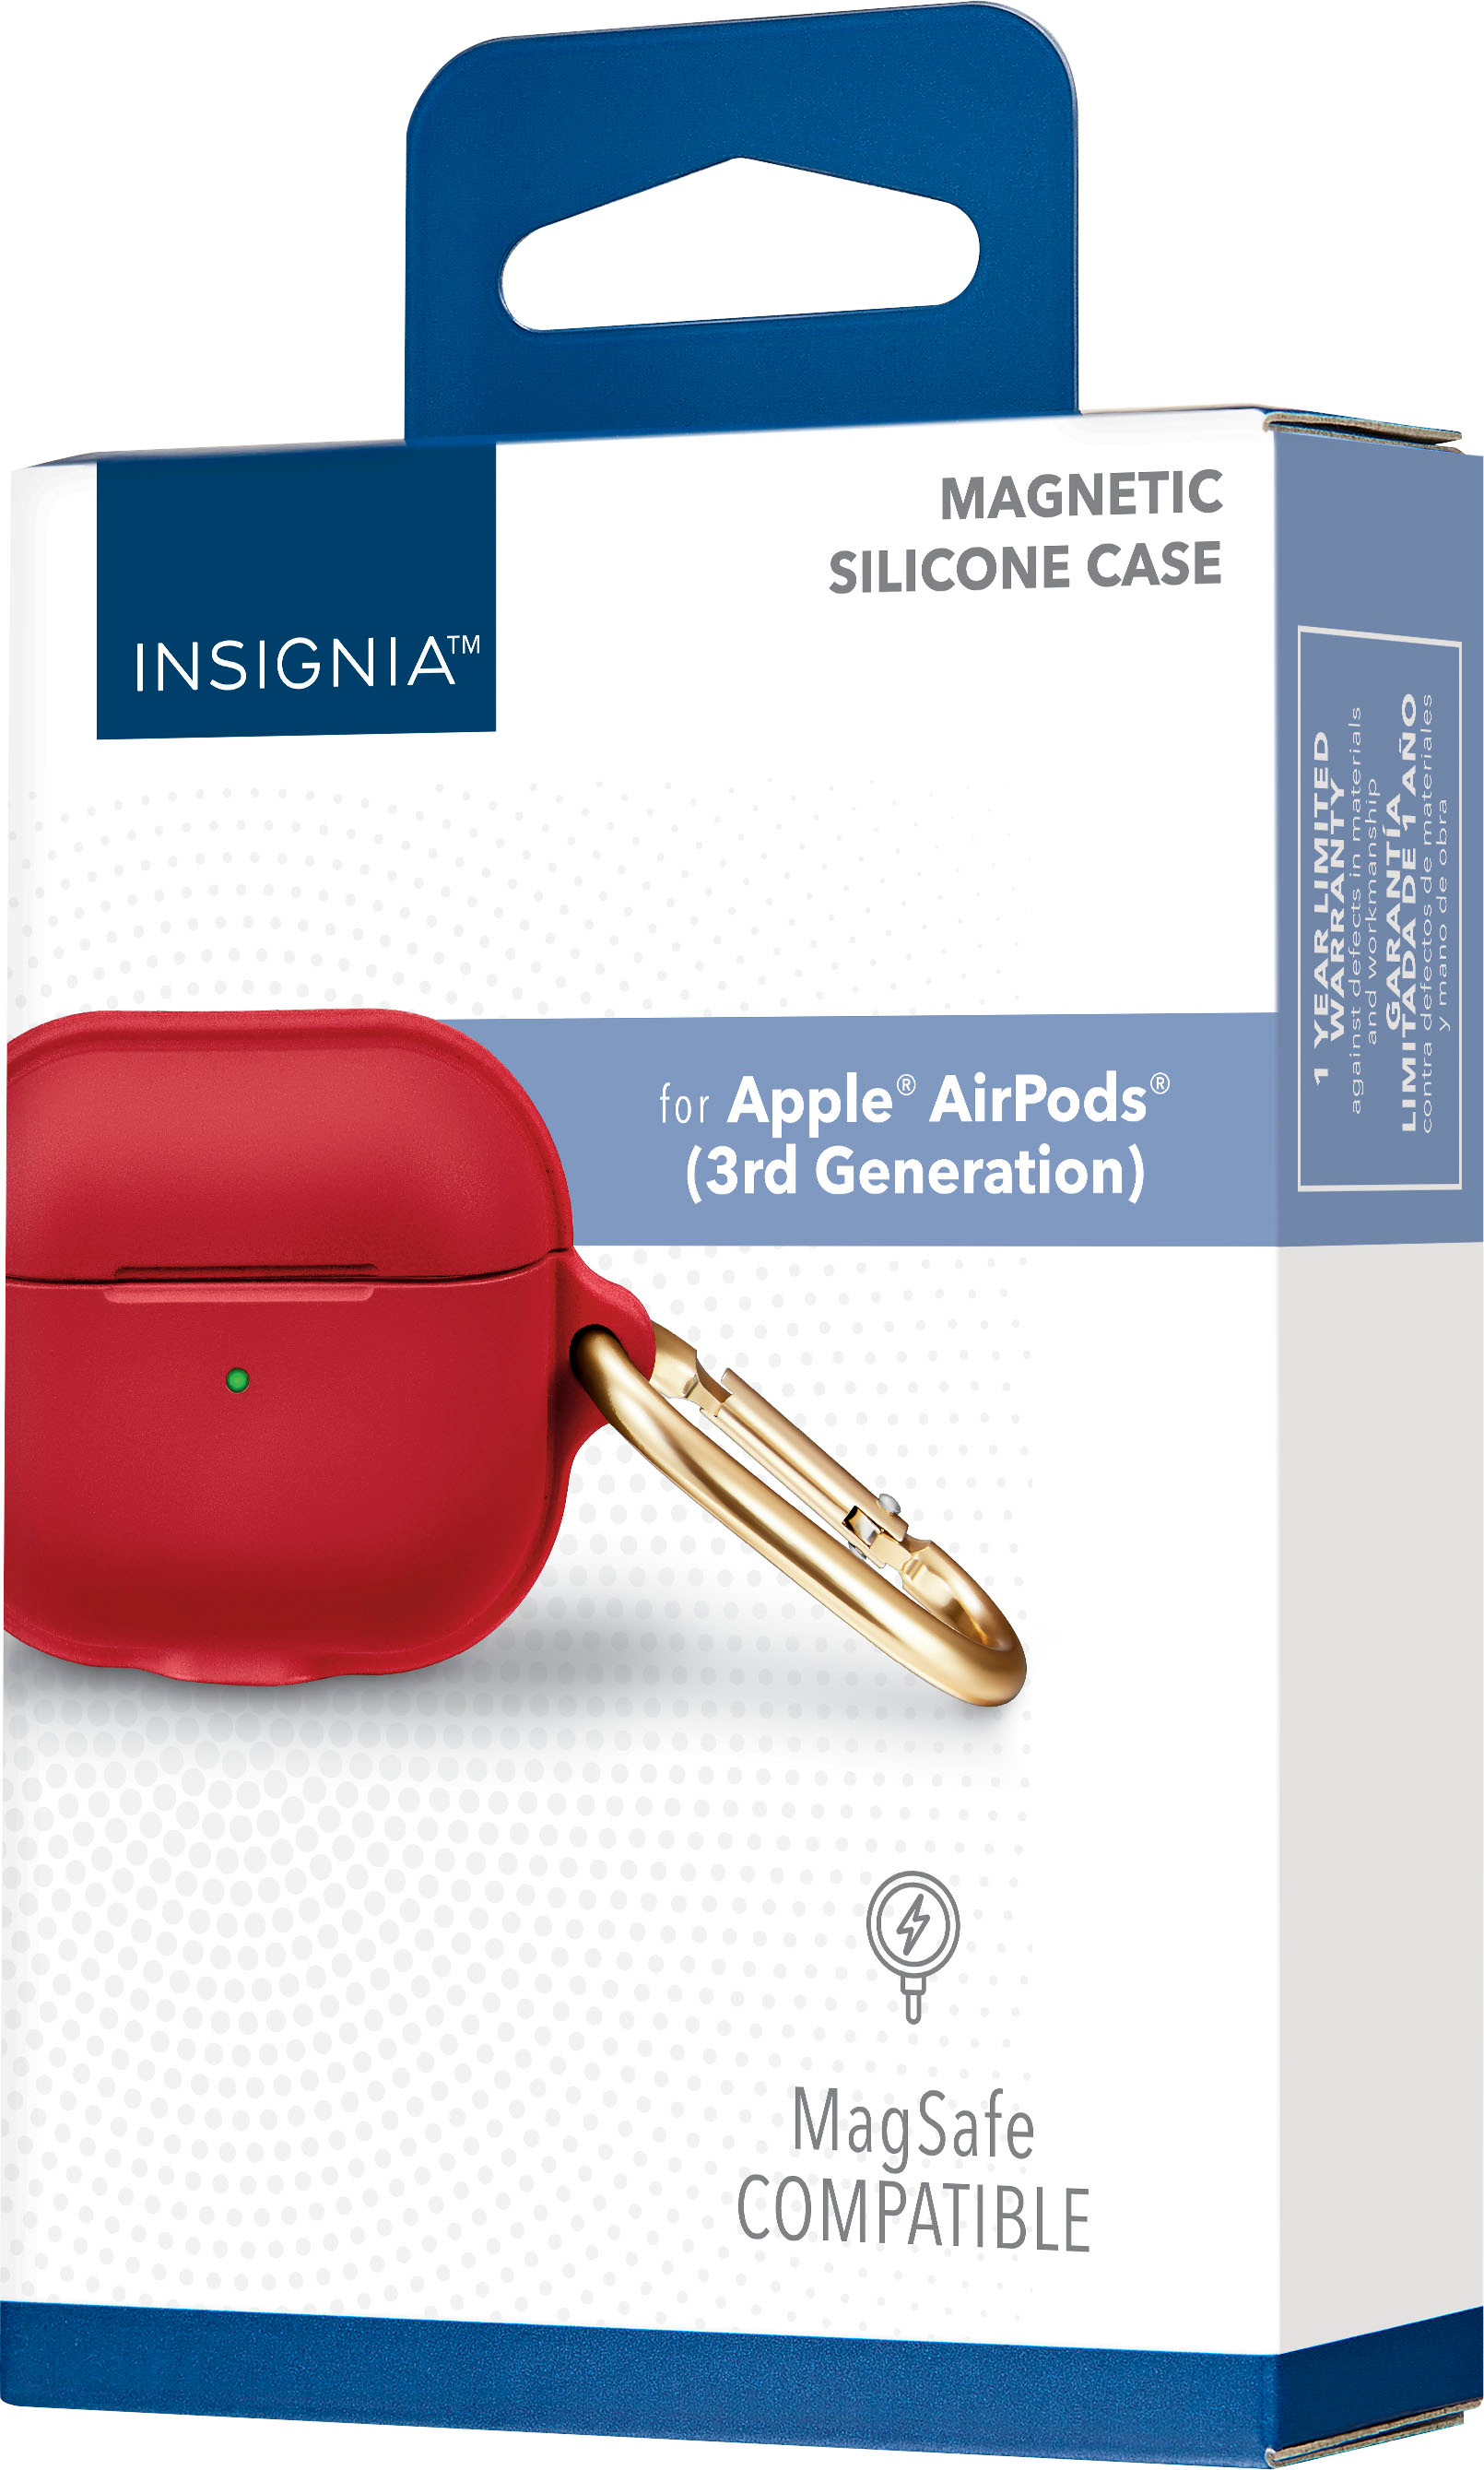 Insignia™ Magnetic Silicone Case for Apple AirPods (3rd Generation